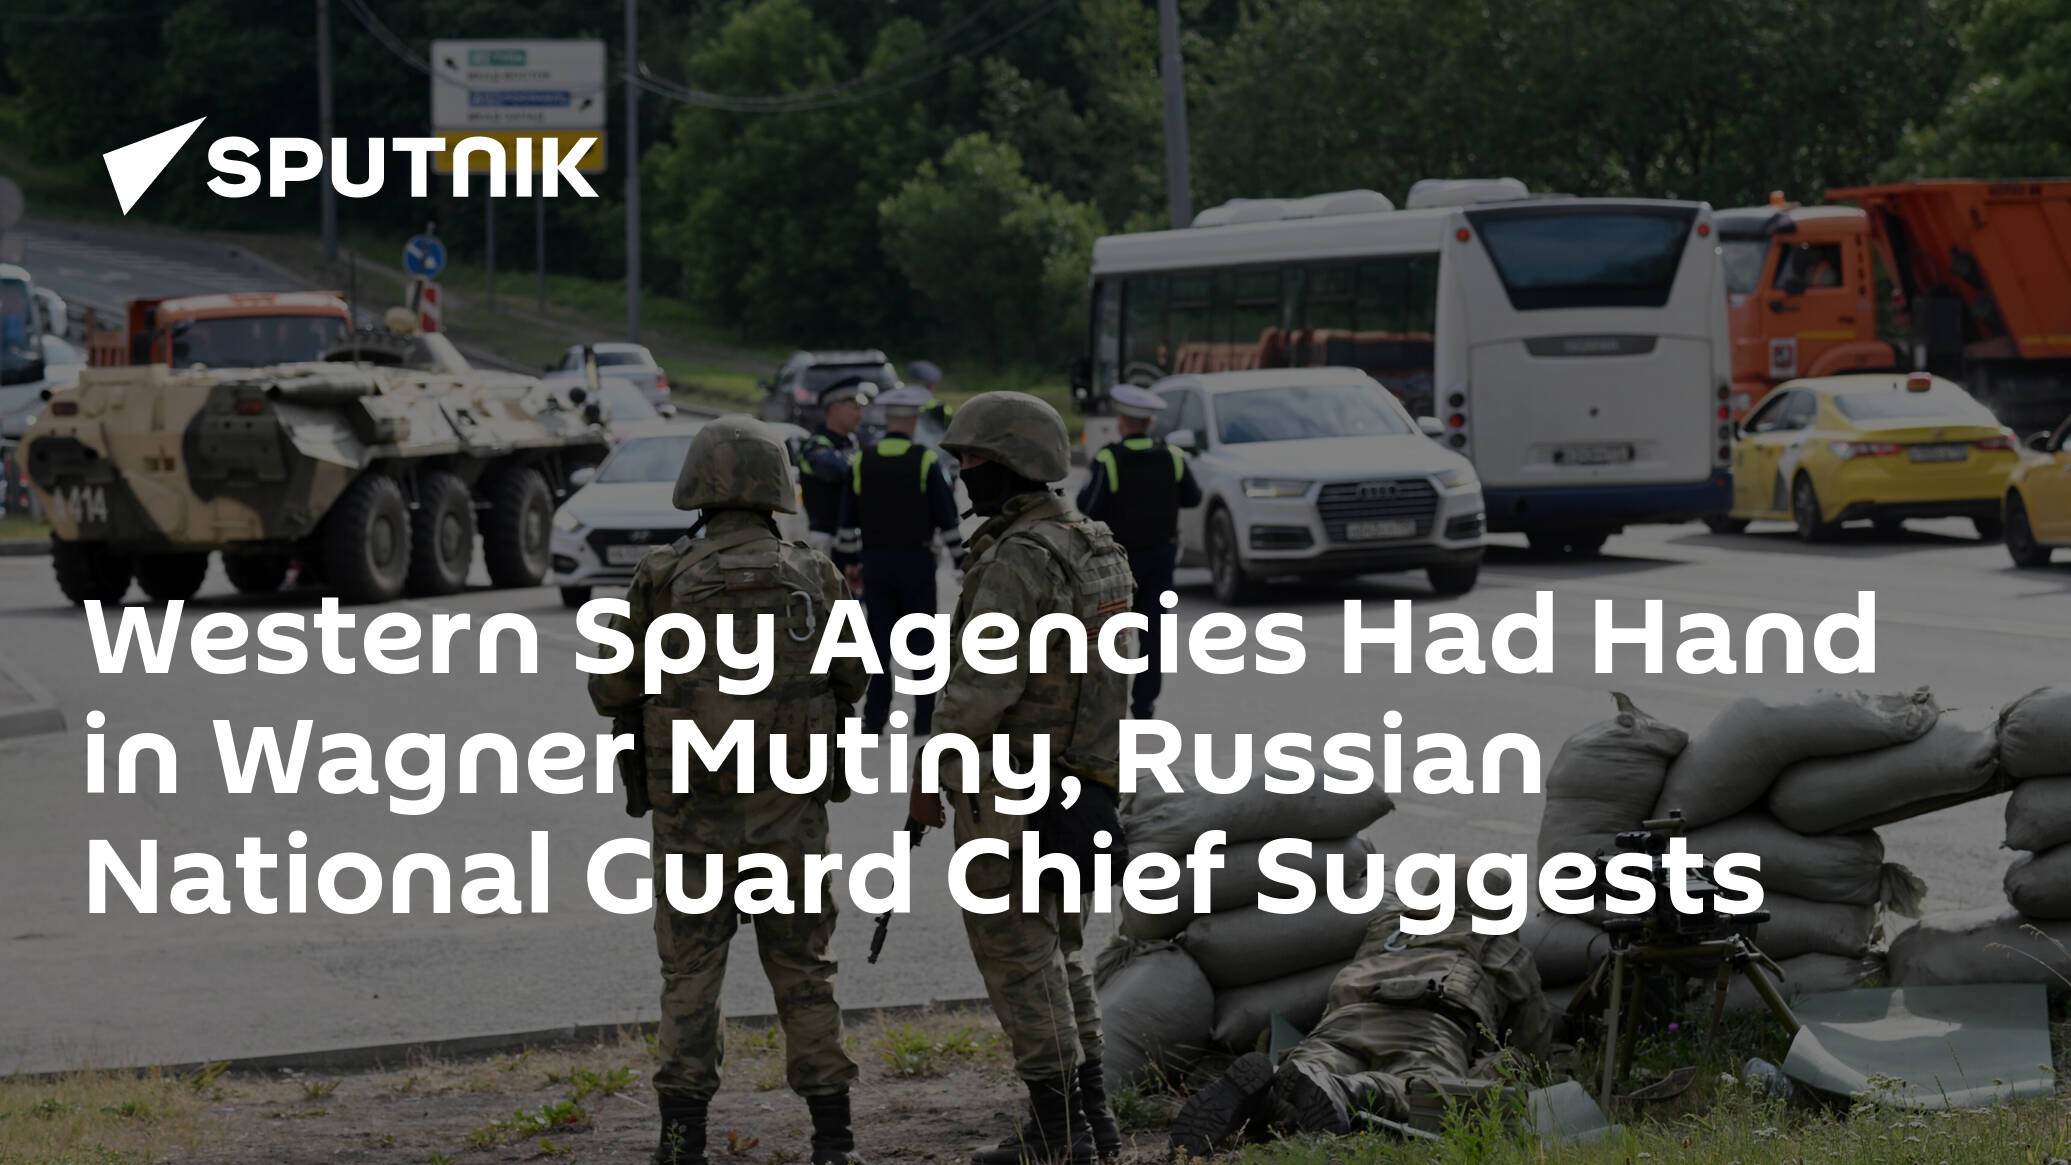 Western Spy Agencies Had Hand in Wagner Mutiny, Russian National Guard Chief Suggests